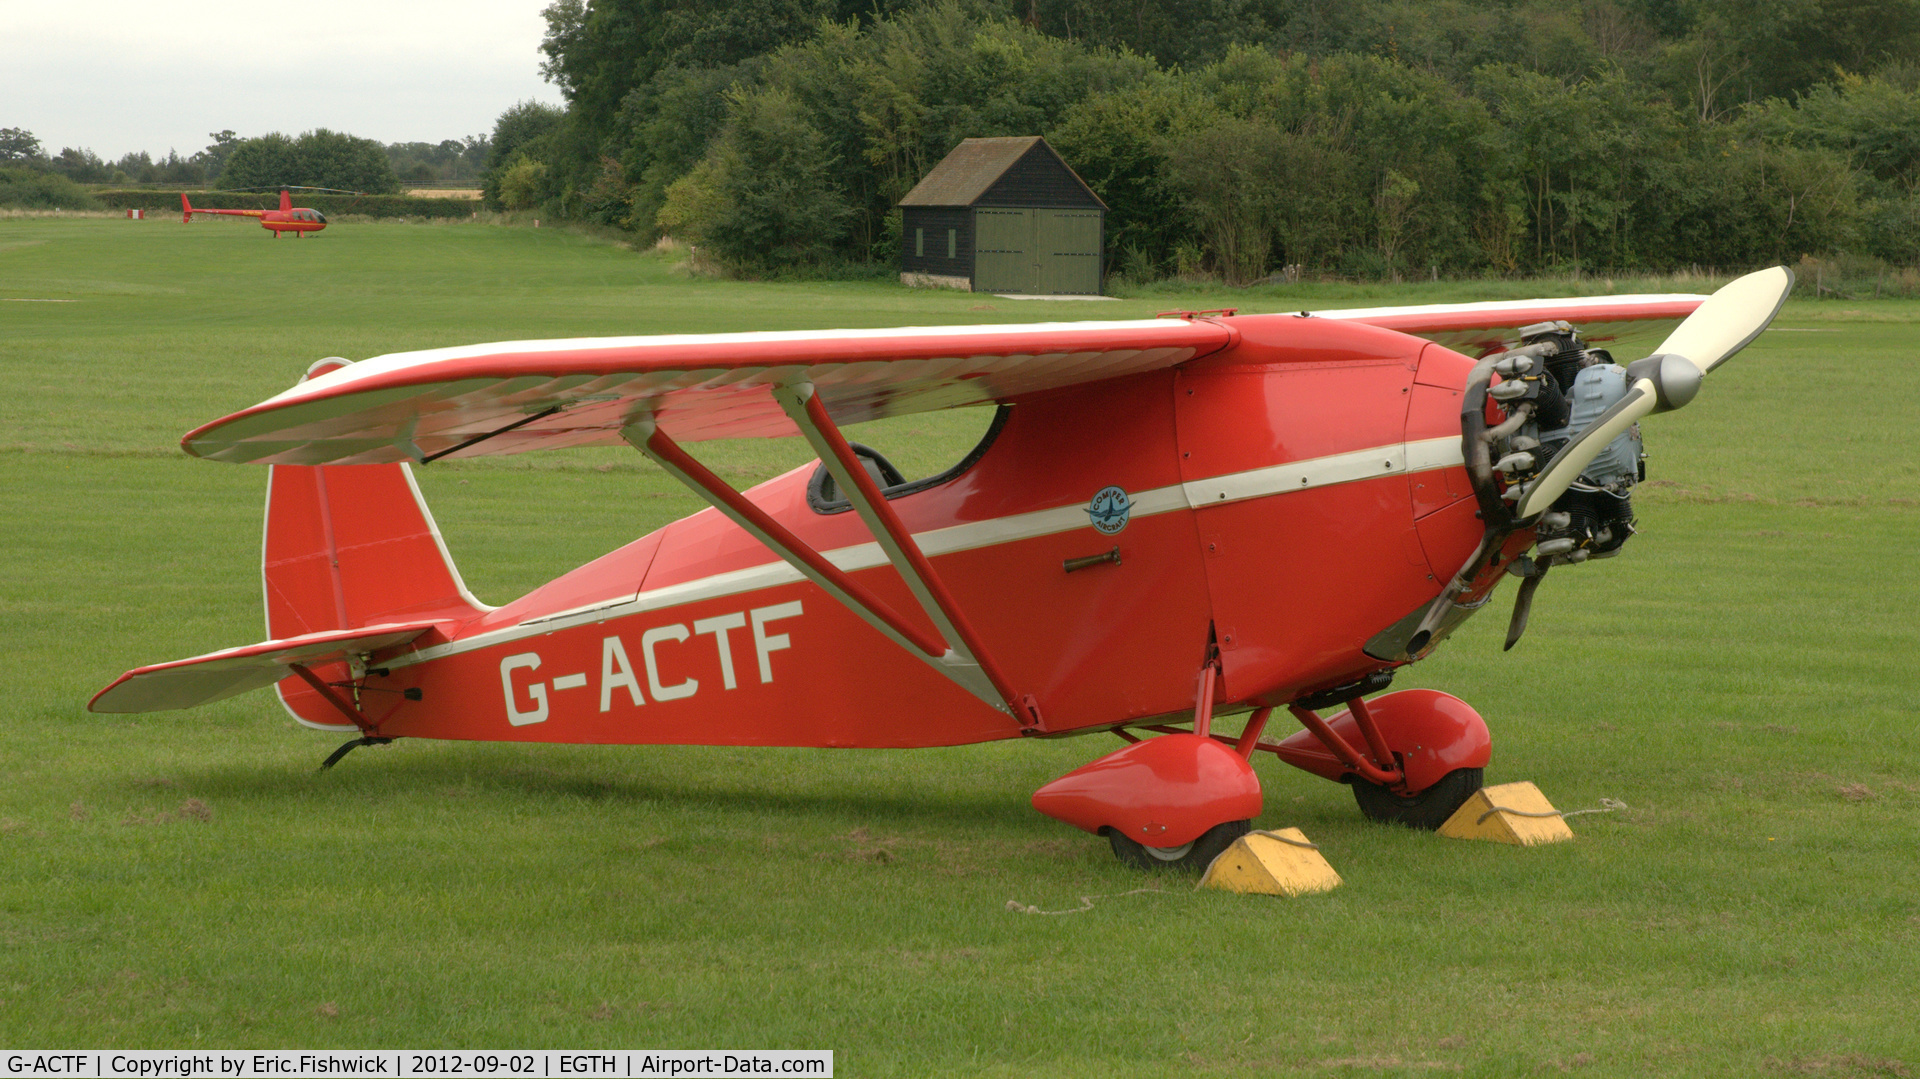 G-ACTF, 1932 Comper CLA-7 Swift C/N S32/9, 3. G-ACTF at Shuttleworth Pagent Air Display, Sept. 2012.